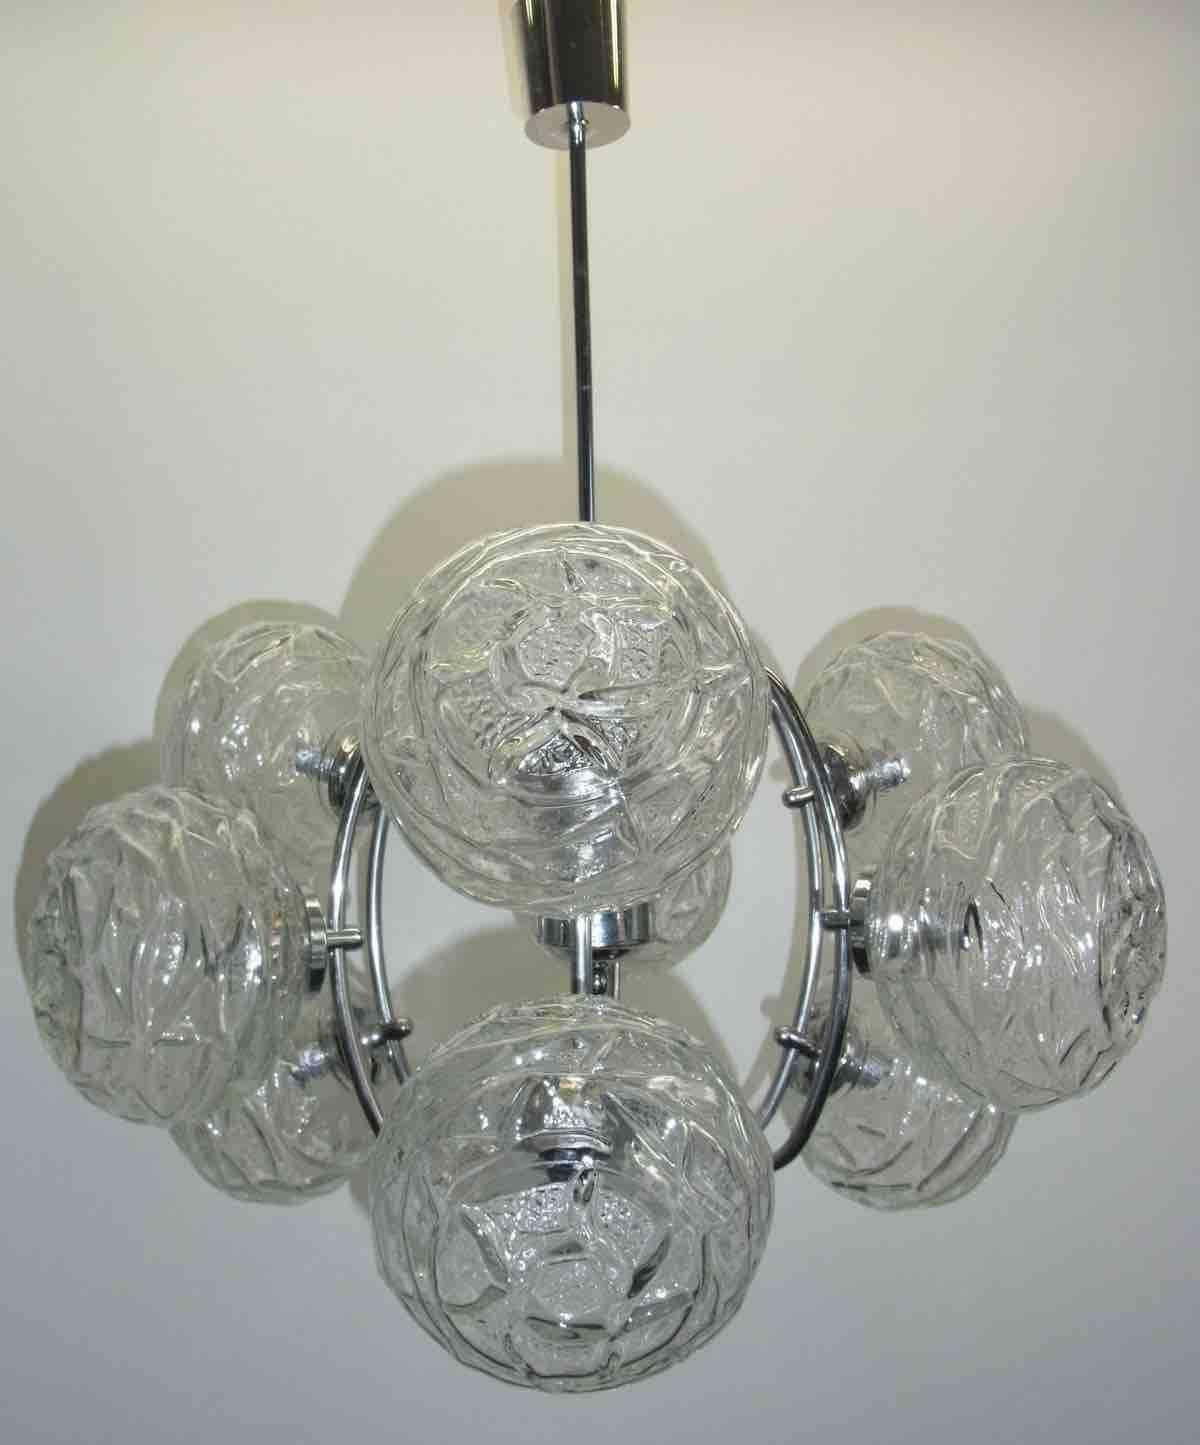 This Mid-Century Modern chandelier was made in the 1960s in Germany. It is made of nine unique glass balls. Made by Honsel Leuchten Germany, marked with Label. The fixture requires nine European E14 candelabra bulbs, each bulb up to 40 watts.